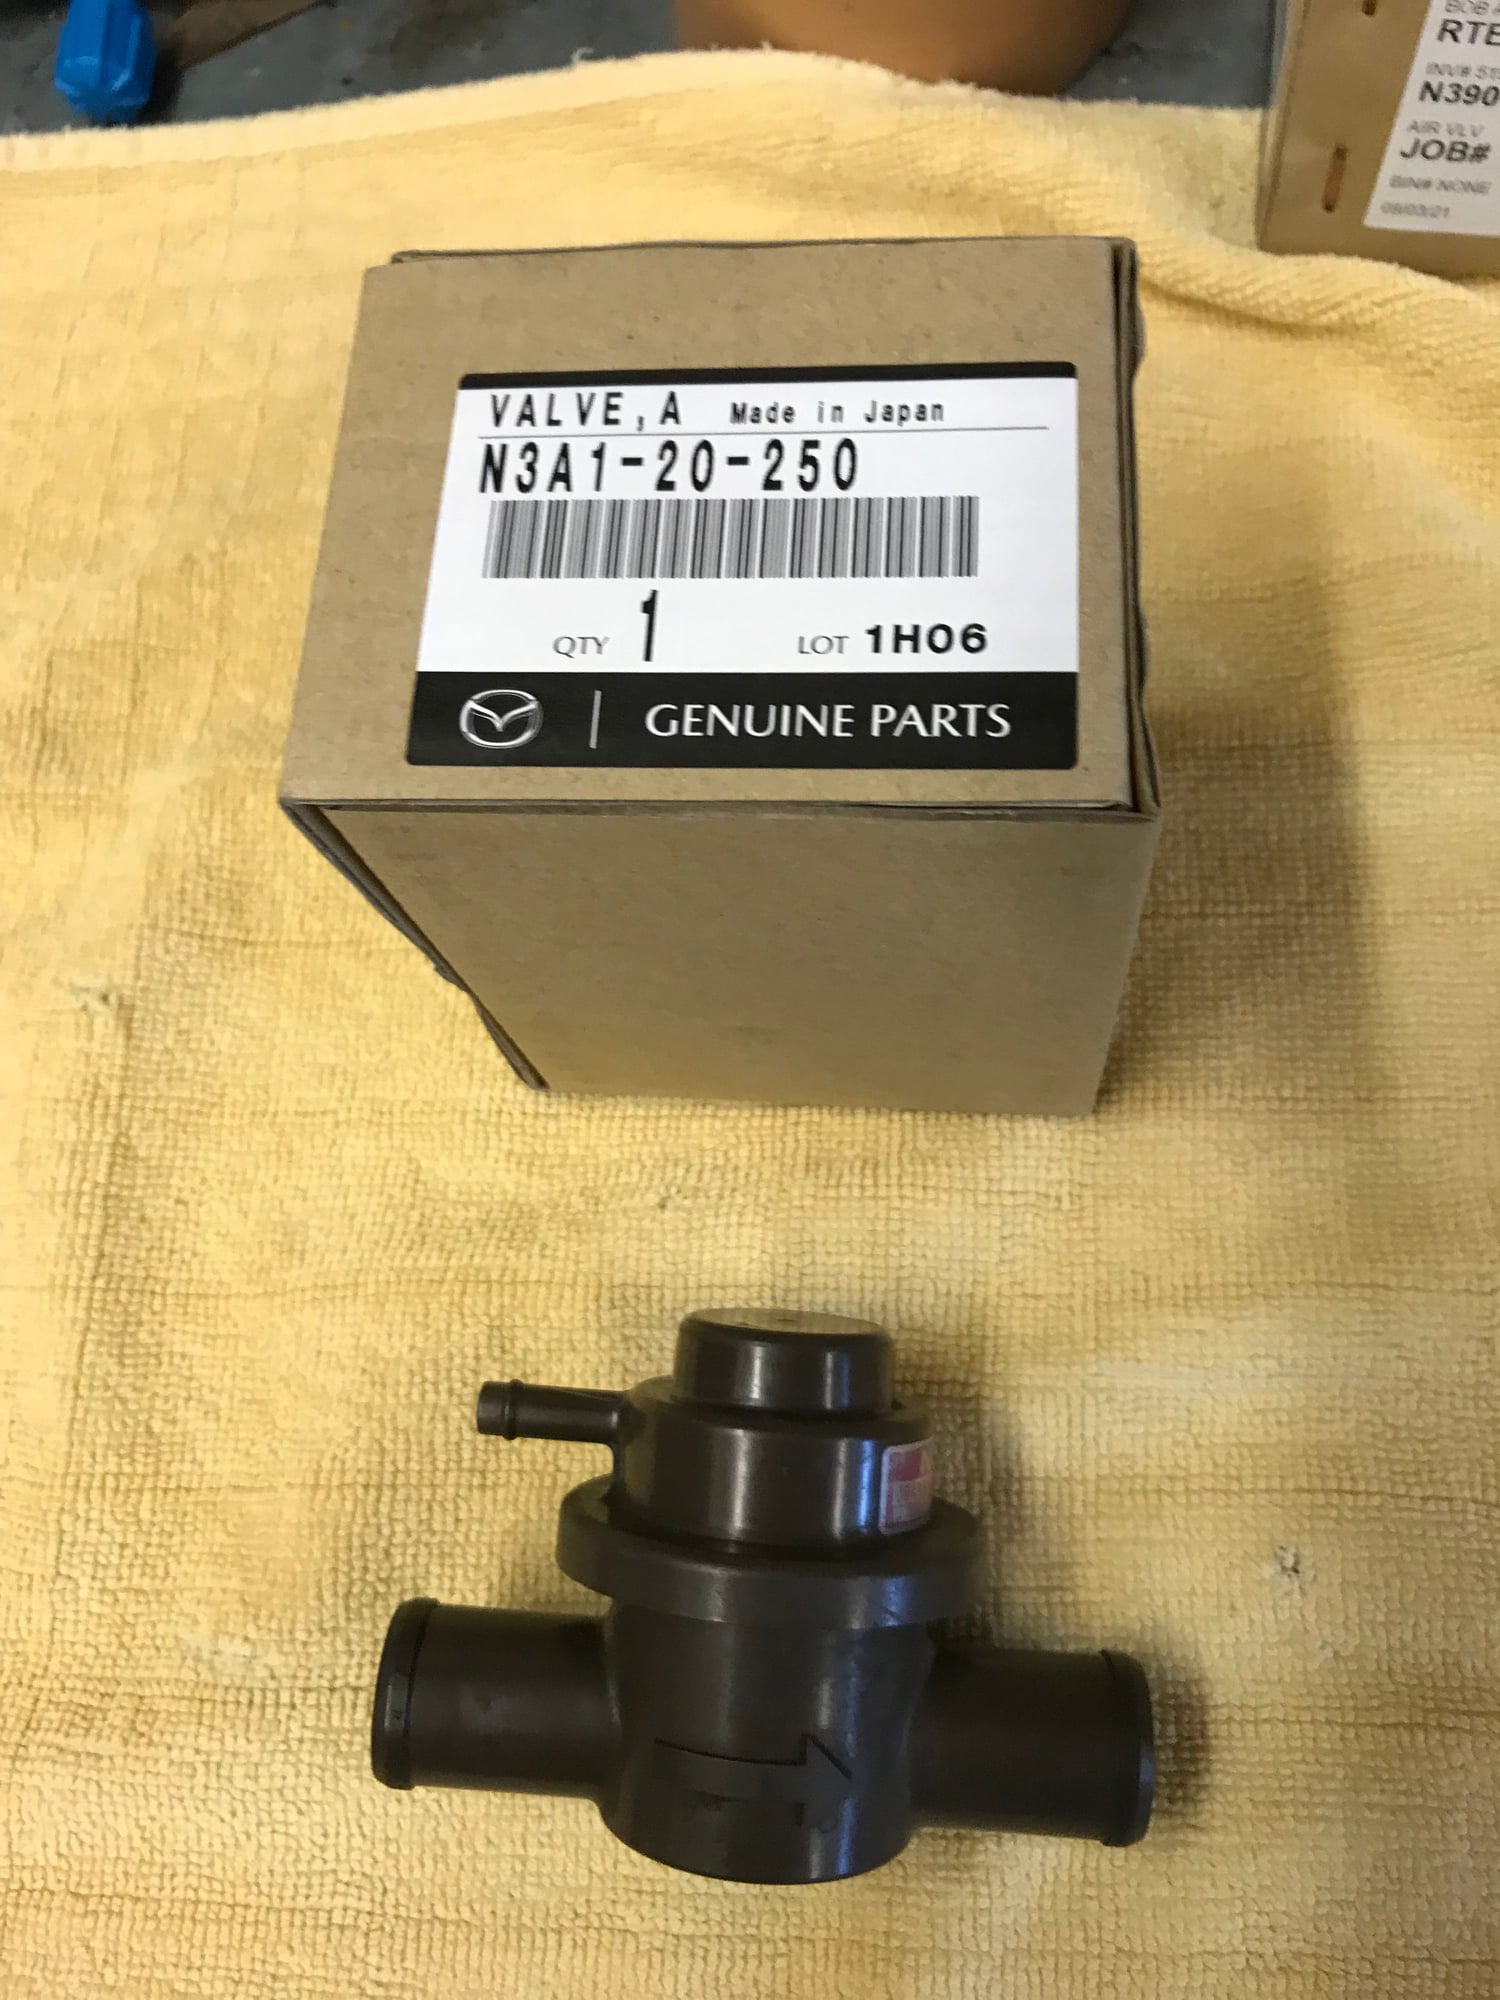 Engine - Intake/Fuel - CRV, BOV, cooling fan relays from 37K mile FD - Used - 1993 to 2002 Mazda RX-7 - Rancho Santa Margarita, CA 92688, United States